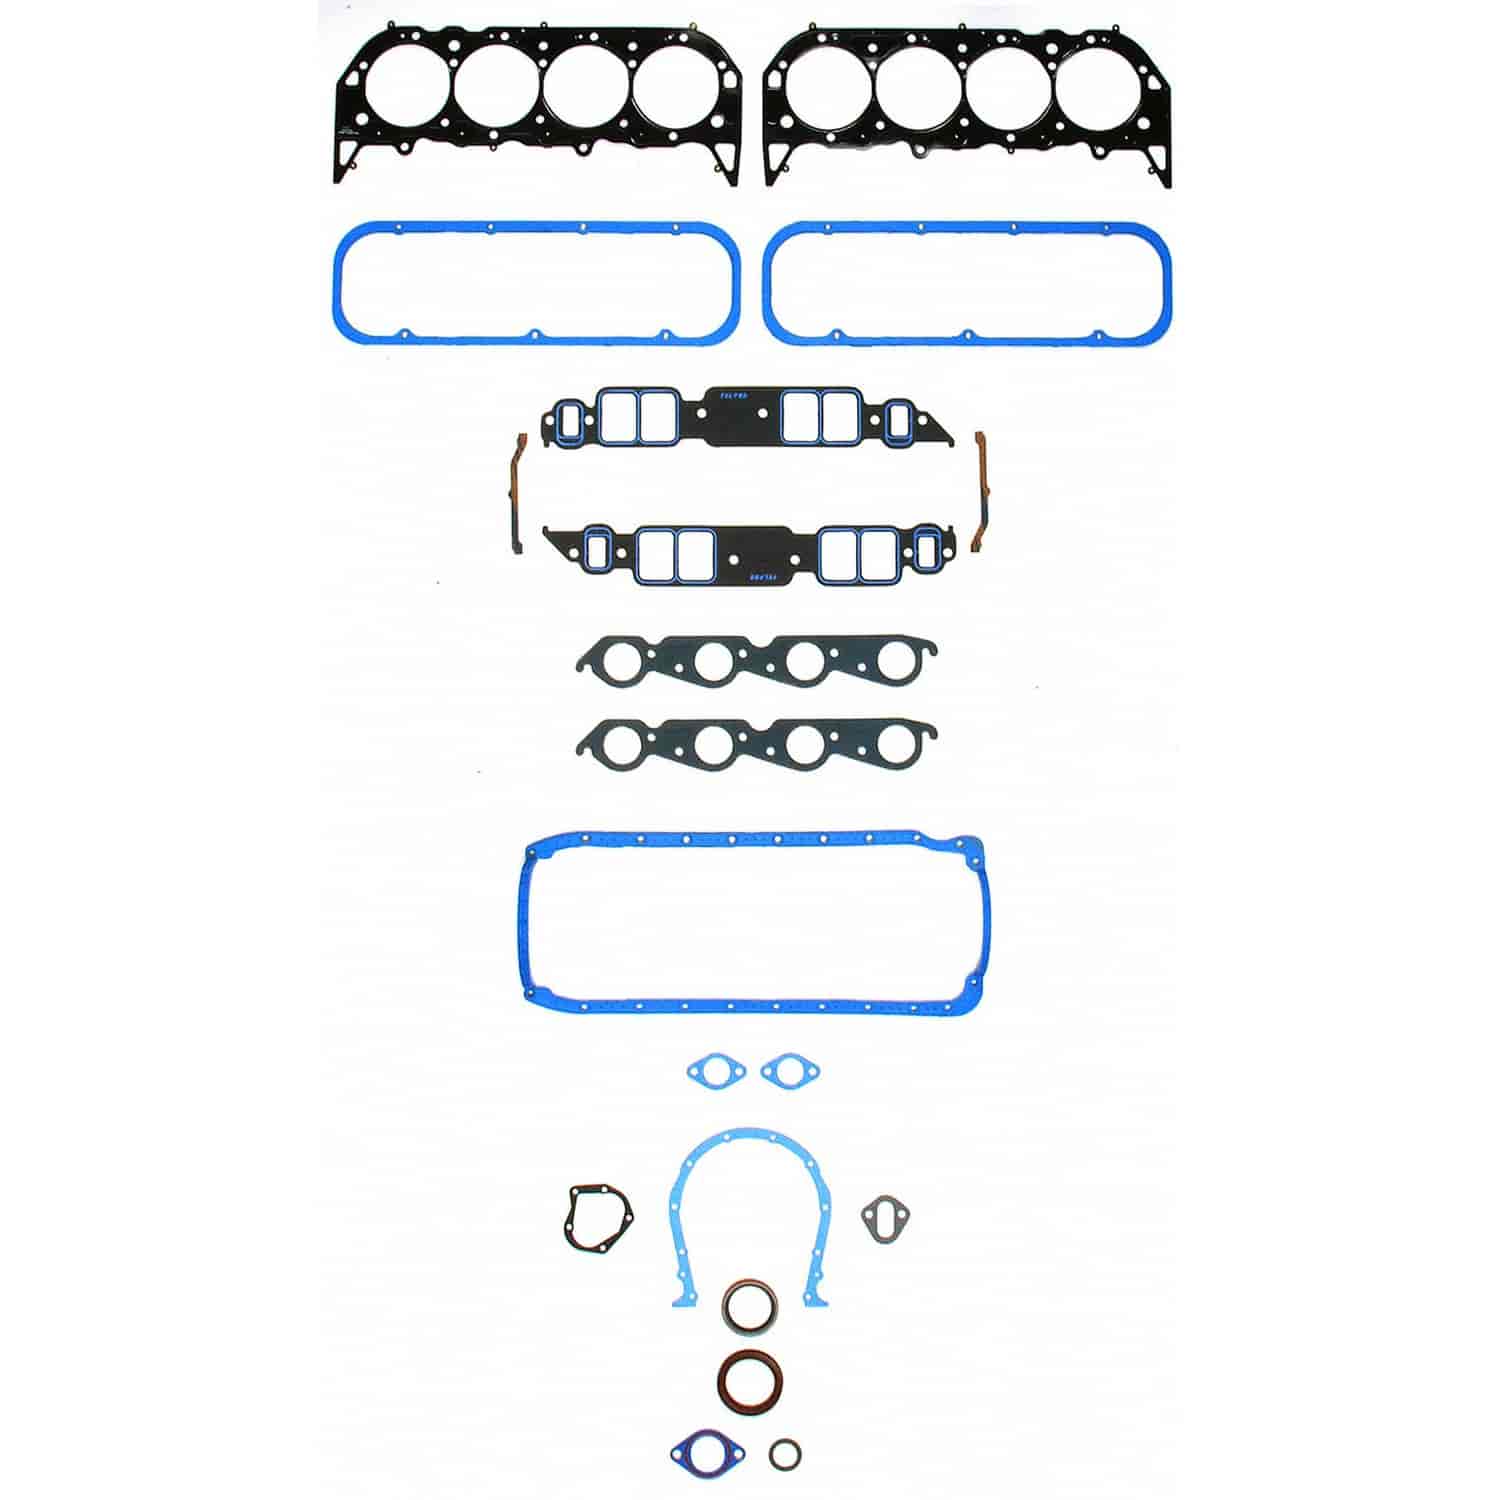 2815 Full Gasket Set for Chevy 396, 402, 427, 454 ci. Big Block Engines w/4.500 in. Bore or Less